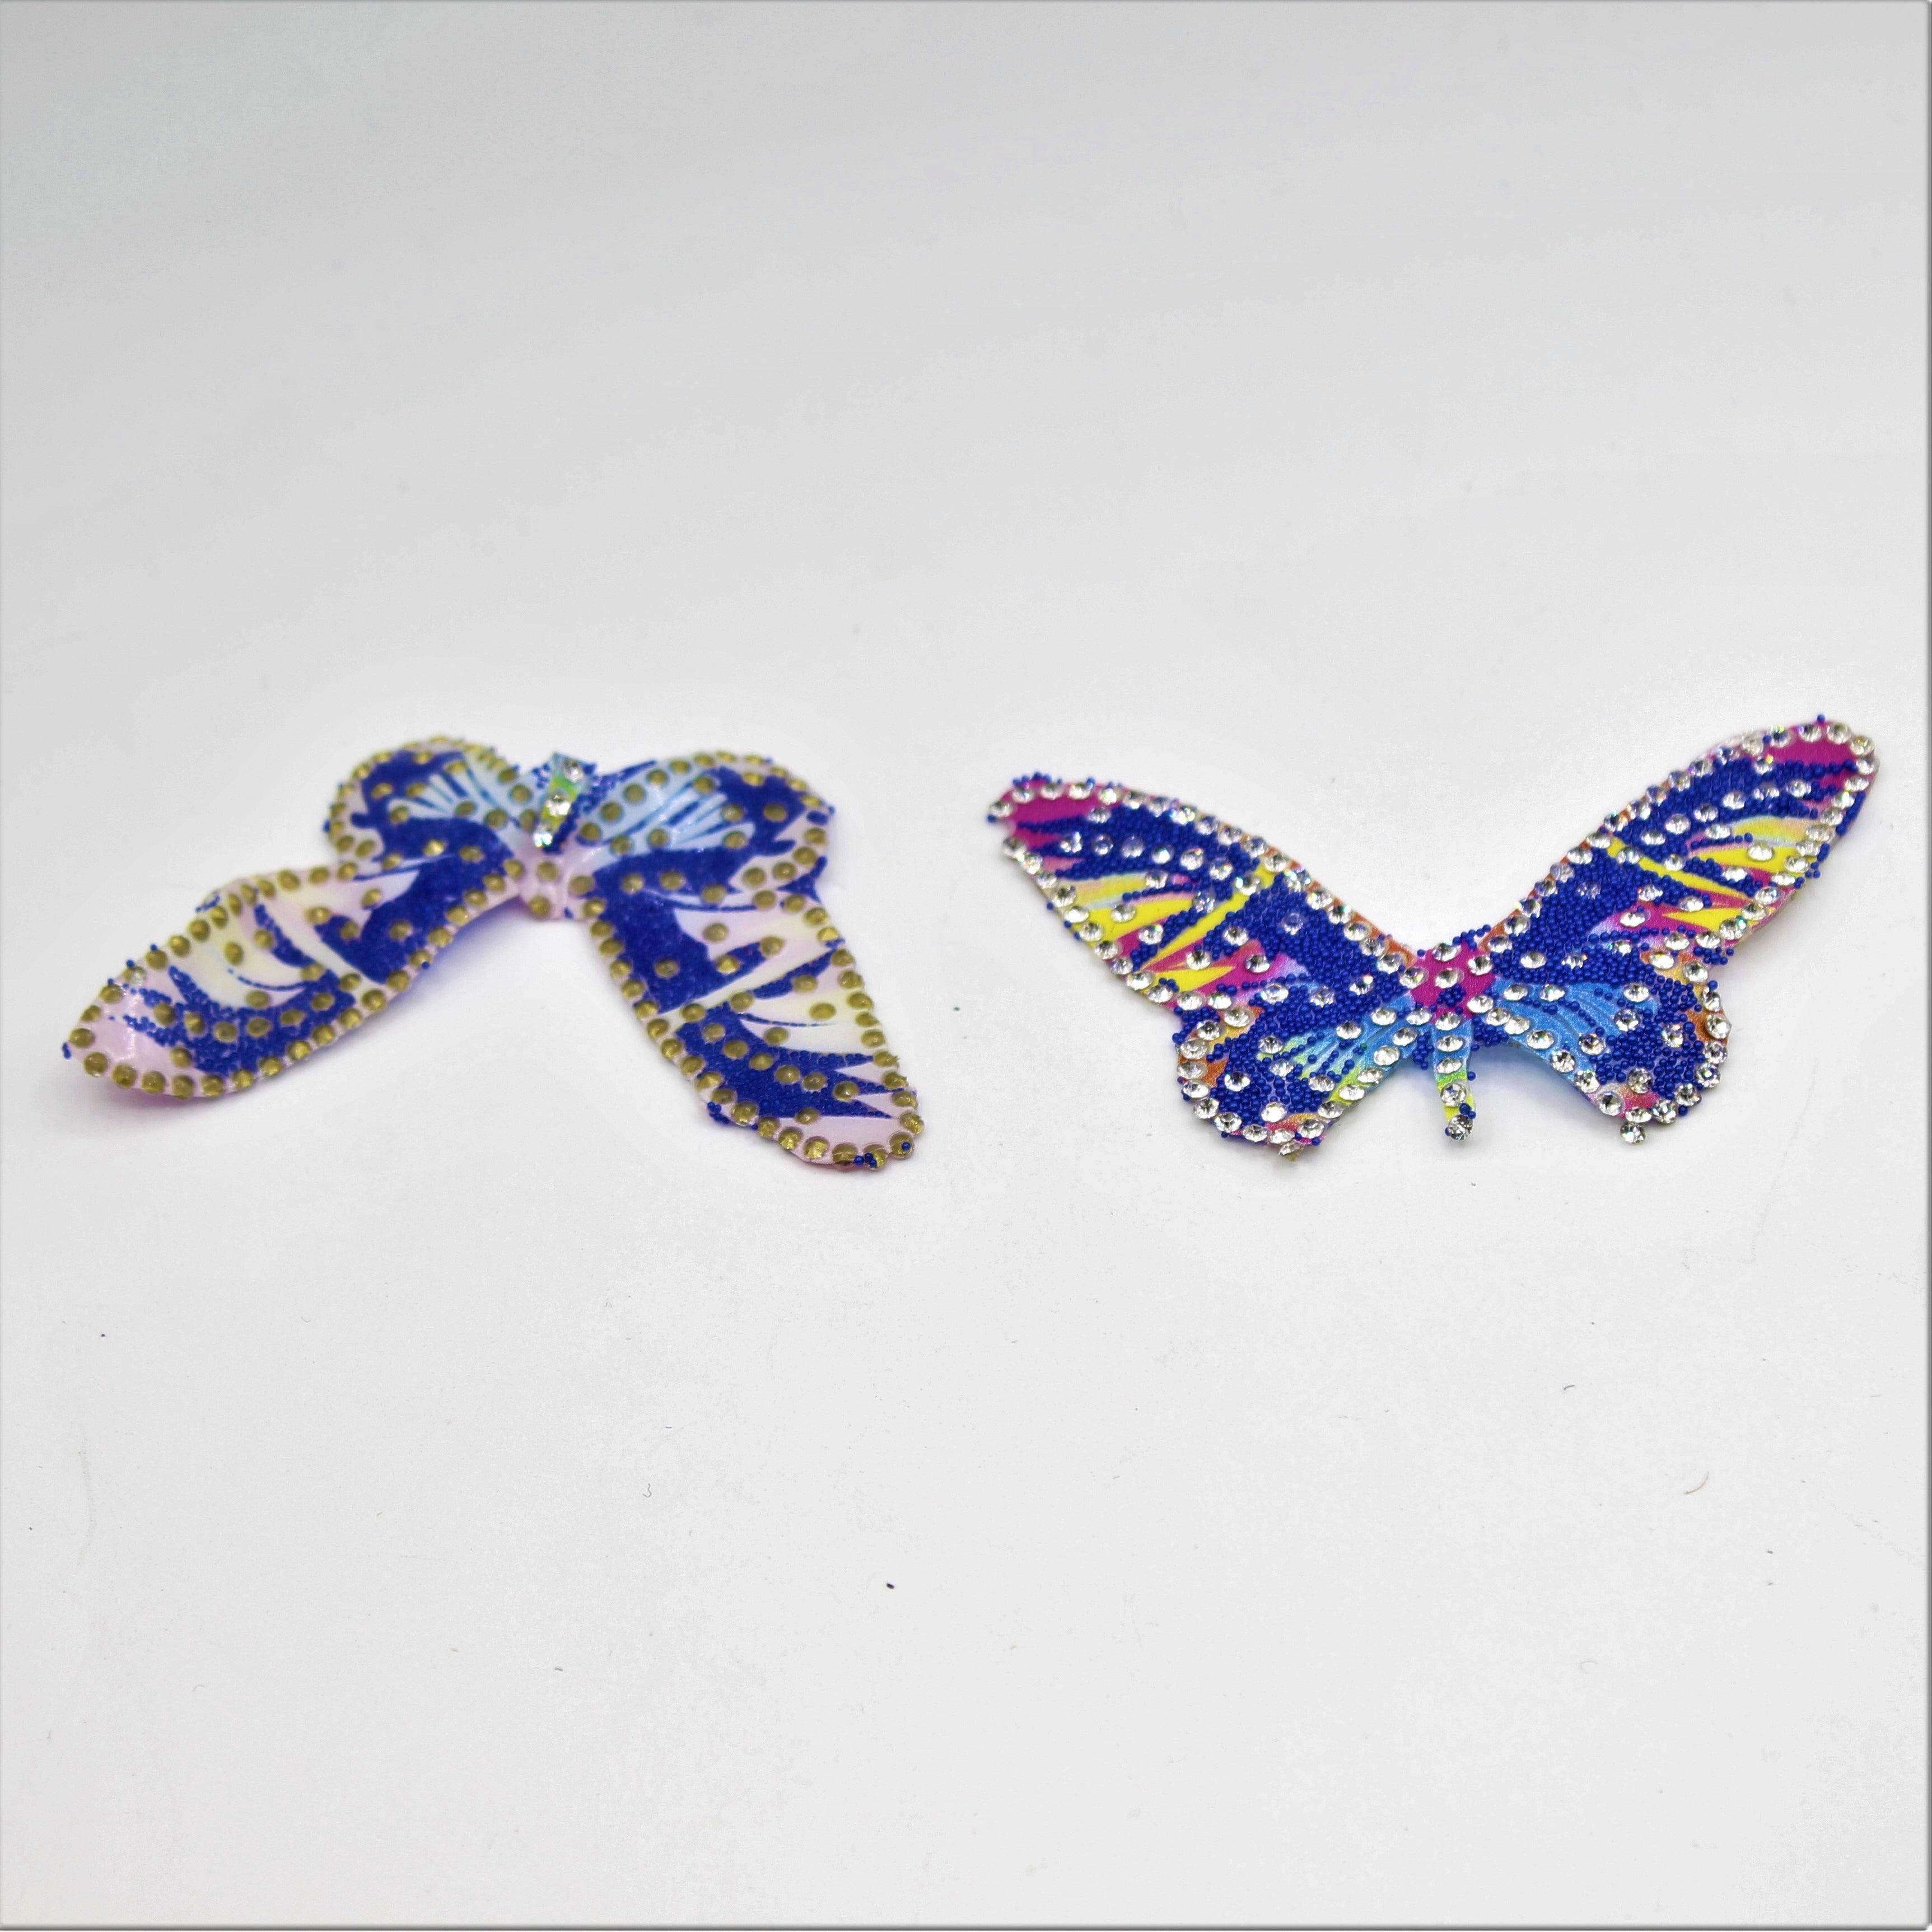 4 Shiny Strass Coloured Butterfly Patches Iron-on 66 x 43 mm - ACCESSOIRES LEDUC